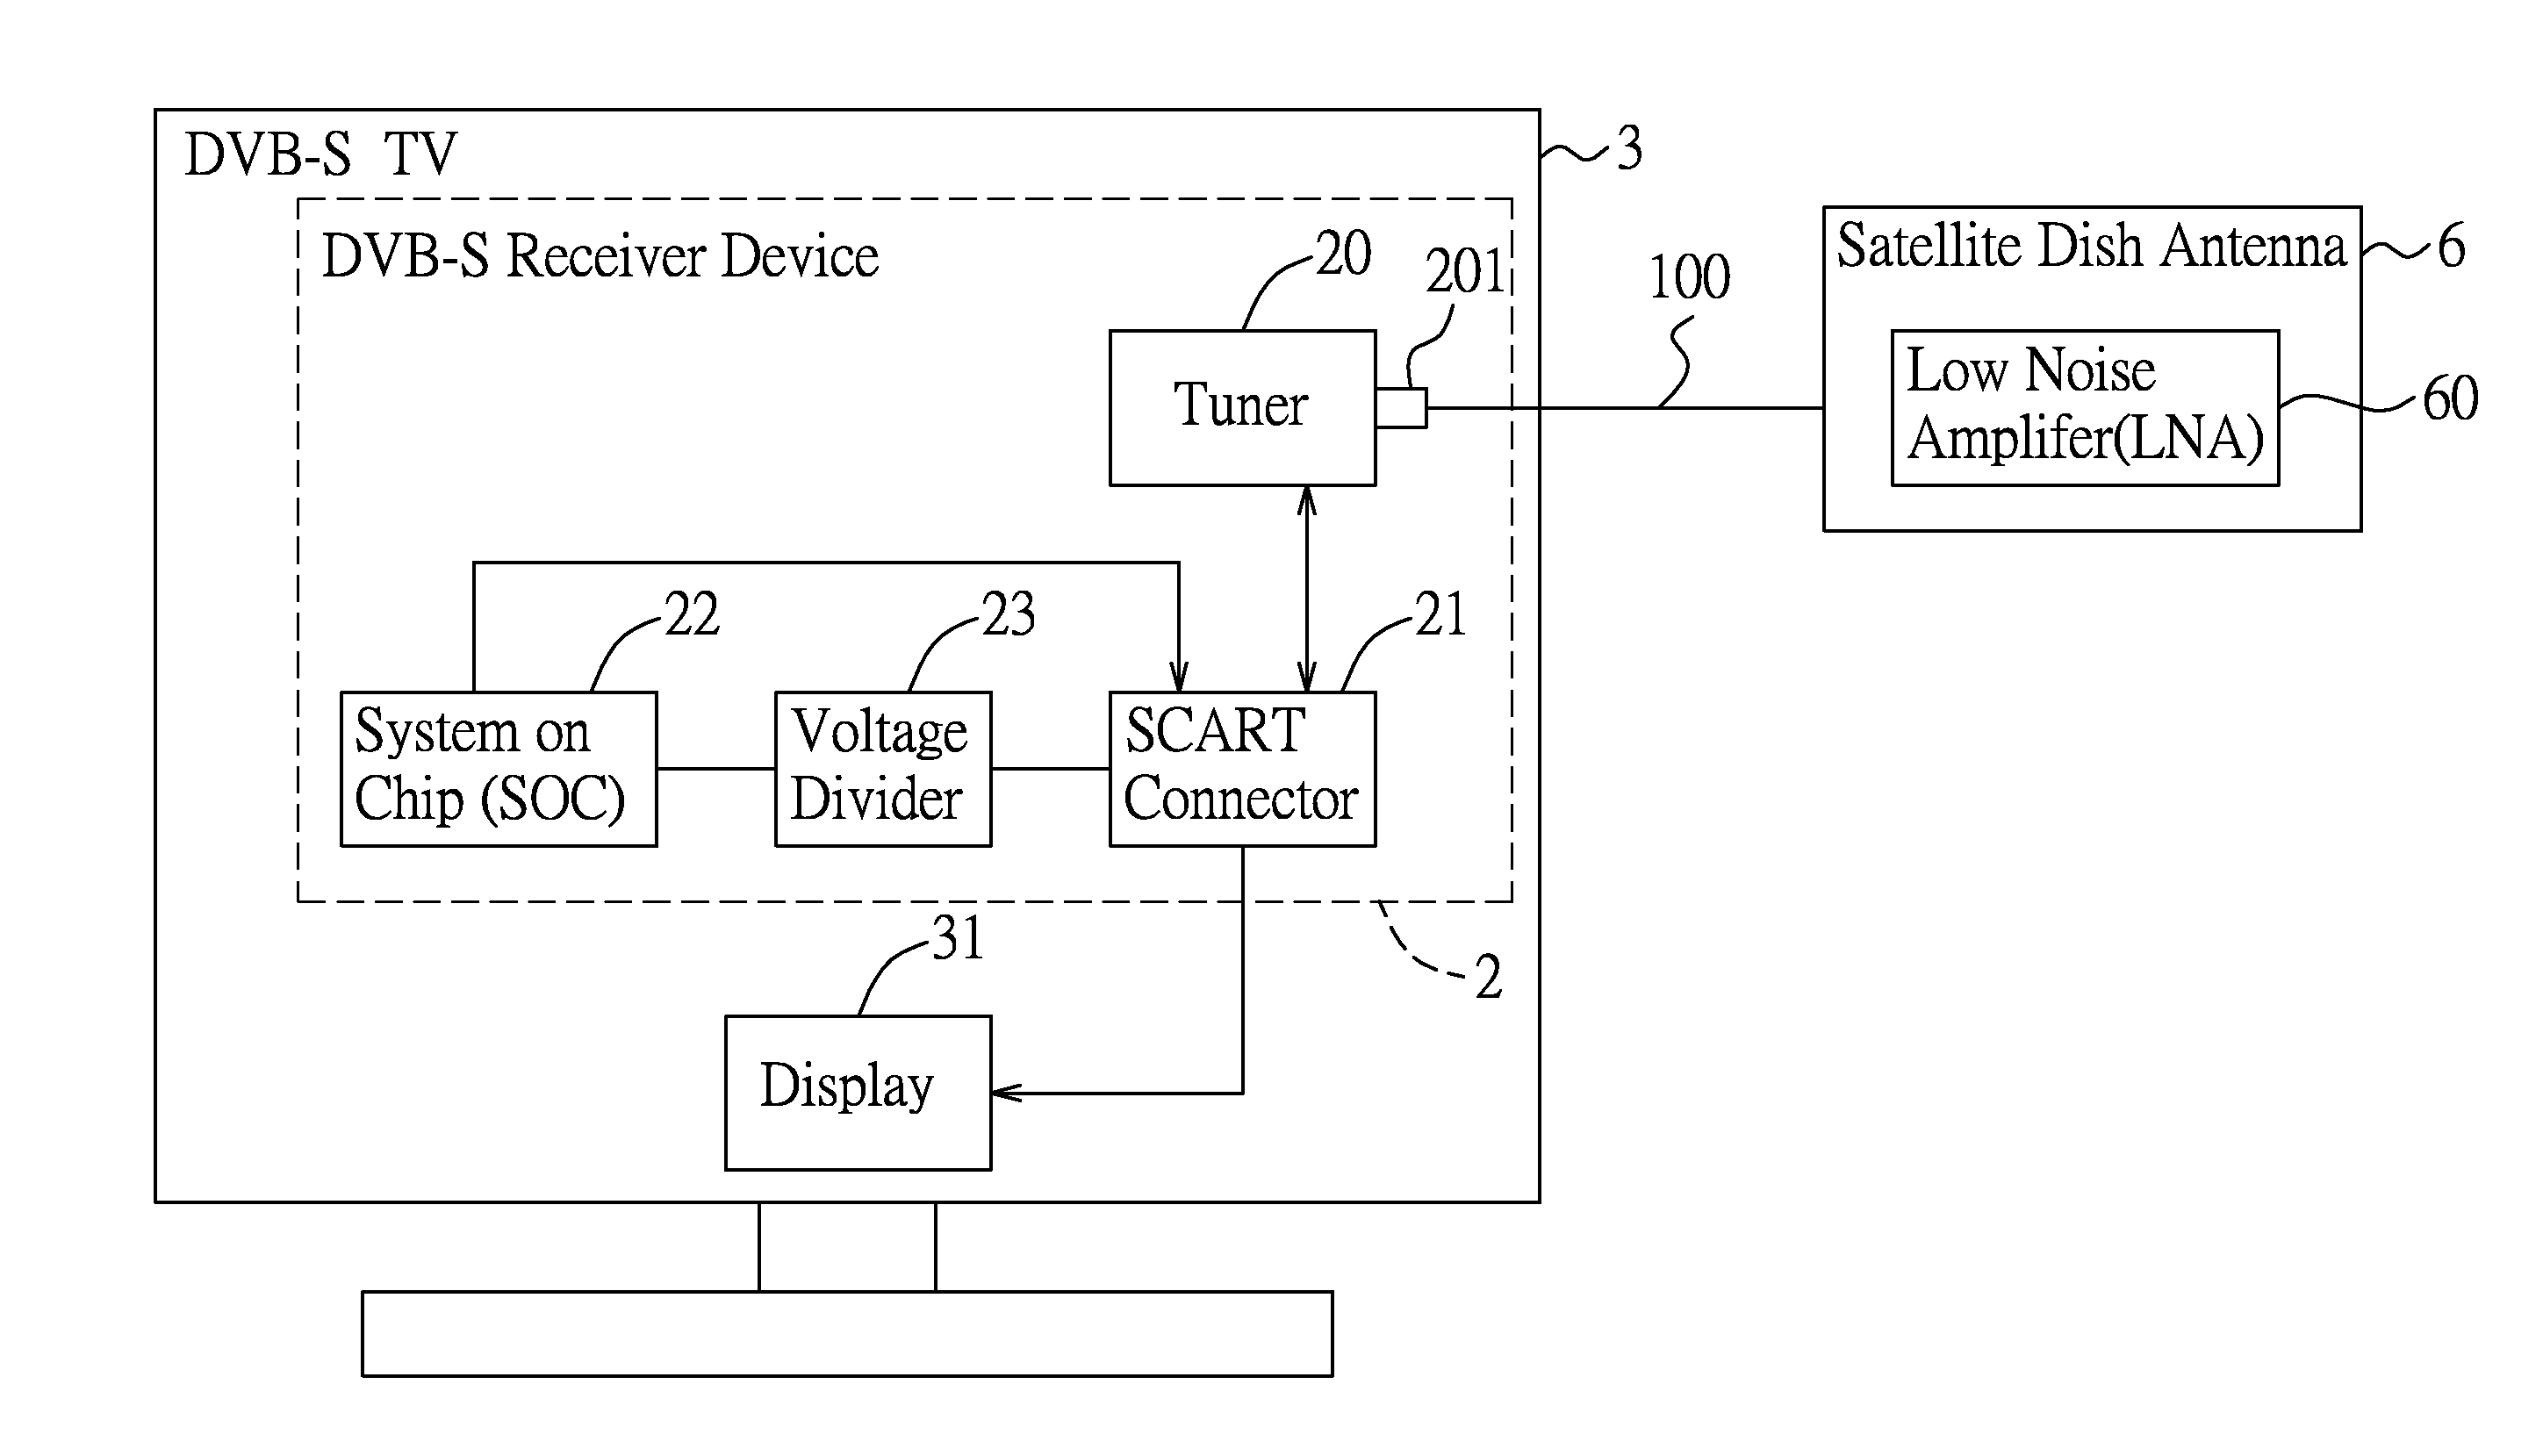 Dvb-s receiver device, adapter for interconnecting a tuner and a scart connector of the dvb-s receiver device, and method for automatically detecting an output voltage of the tuner